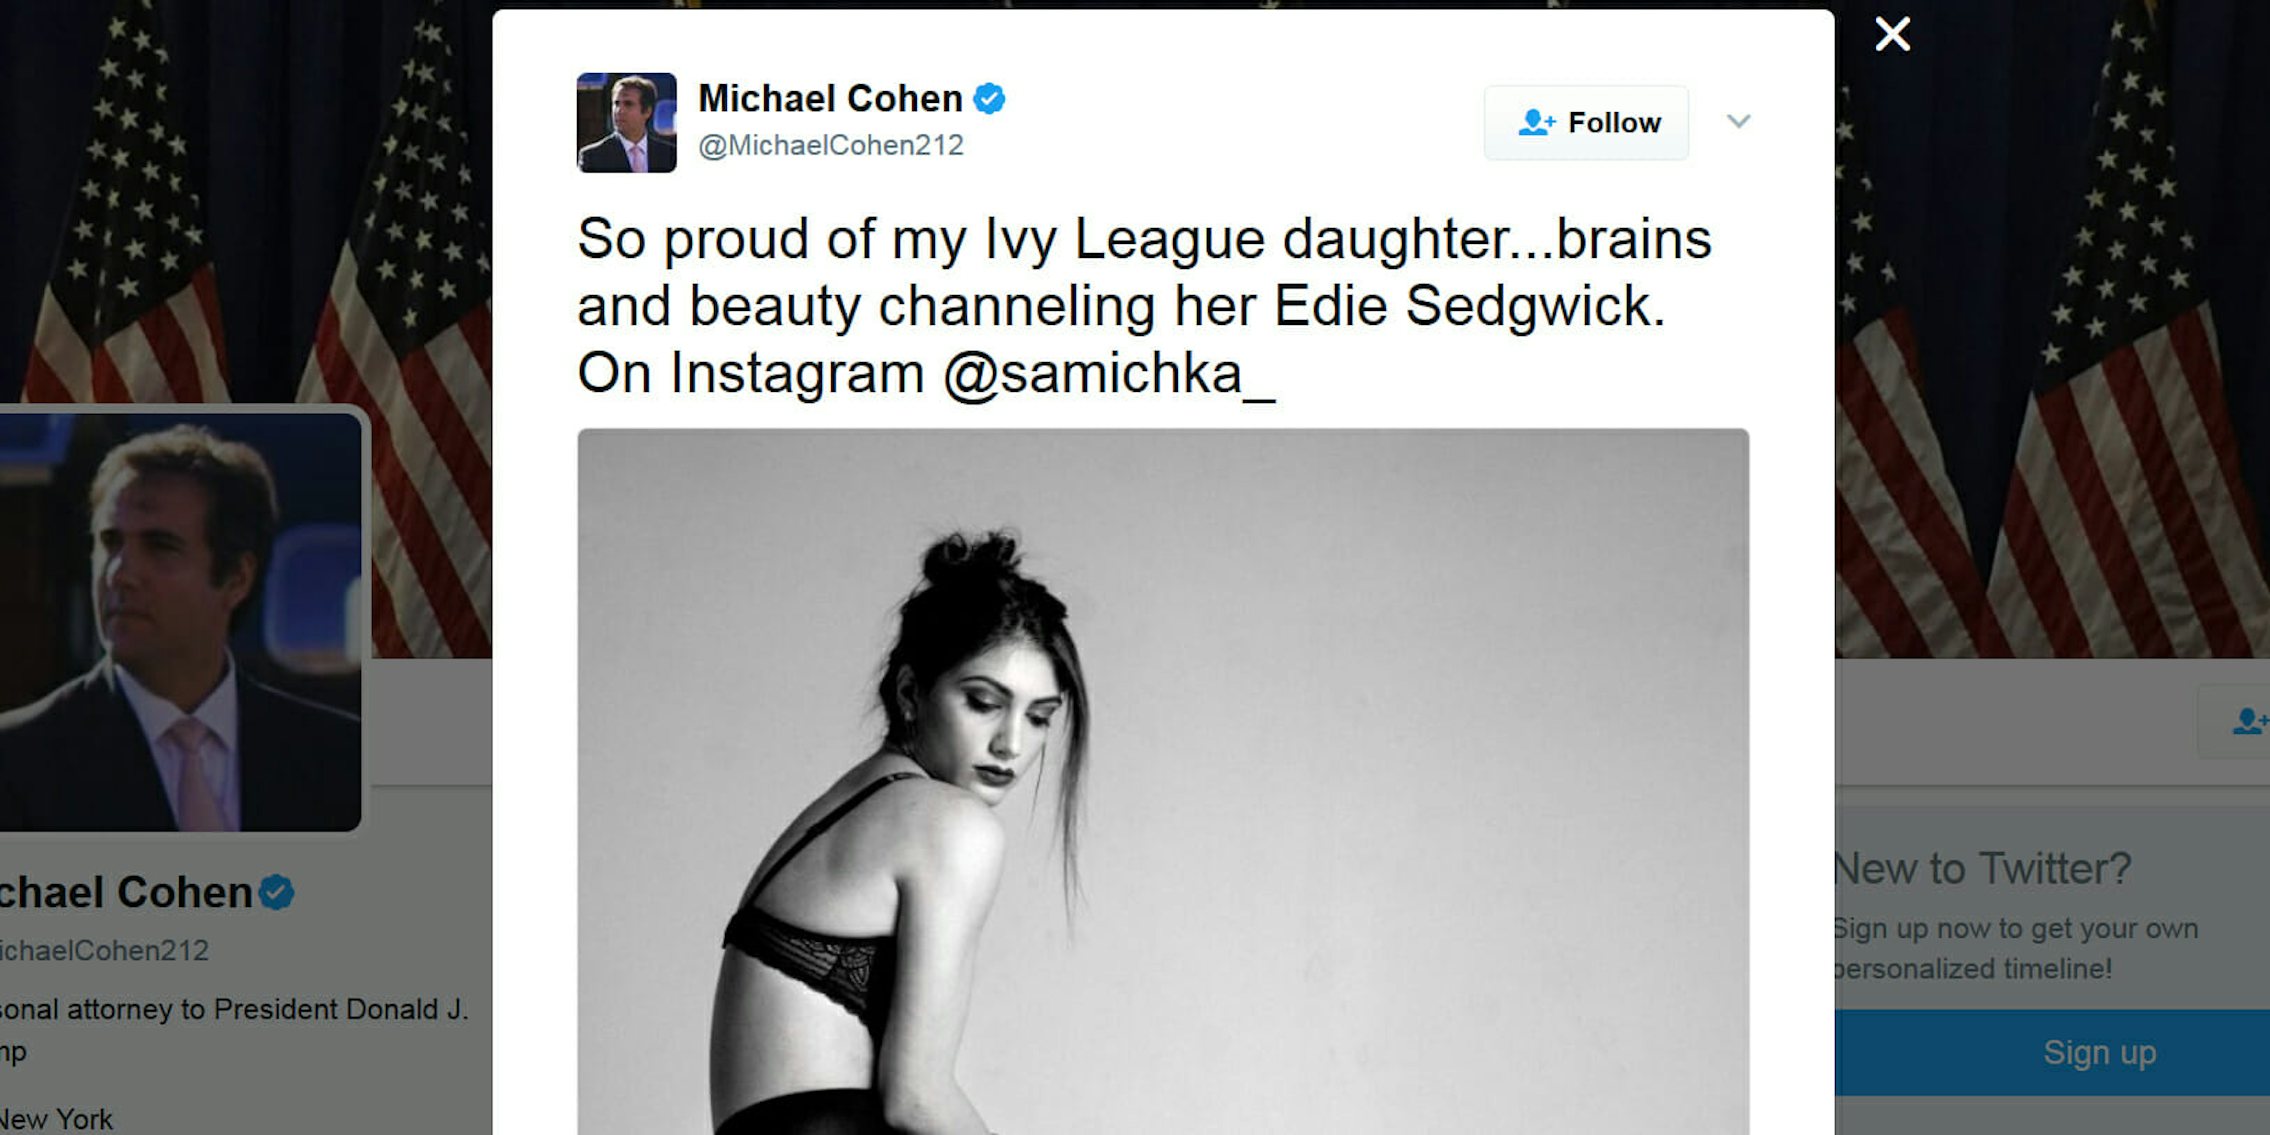 President Donald Trump's attorney Michael Cohen tweeted a photo of his daughter in lingerie.